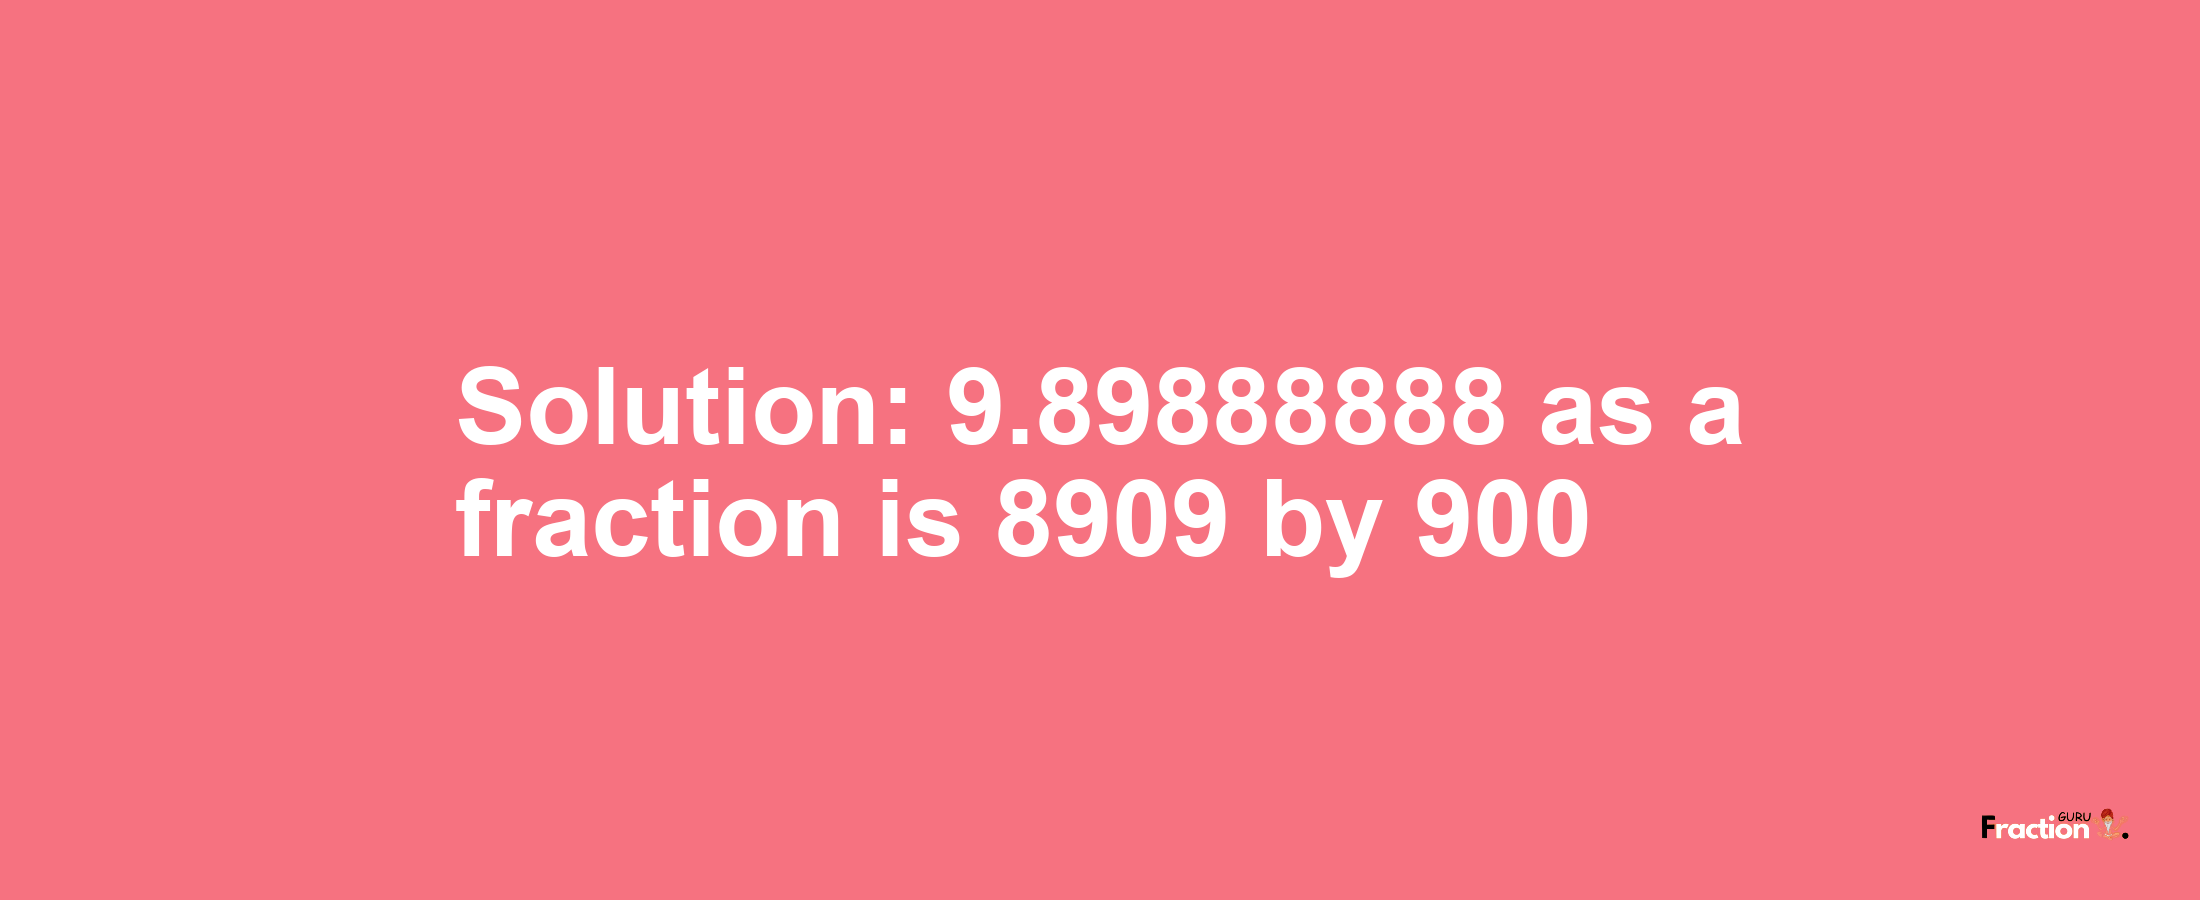 Solution:9.89888888 as a fraction is 8909/900